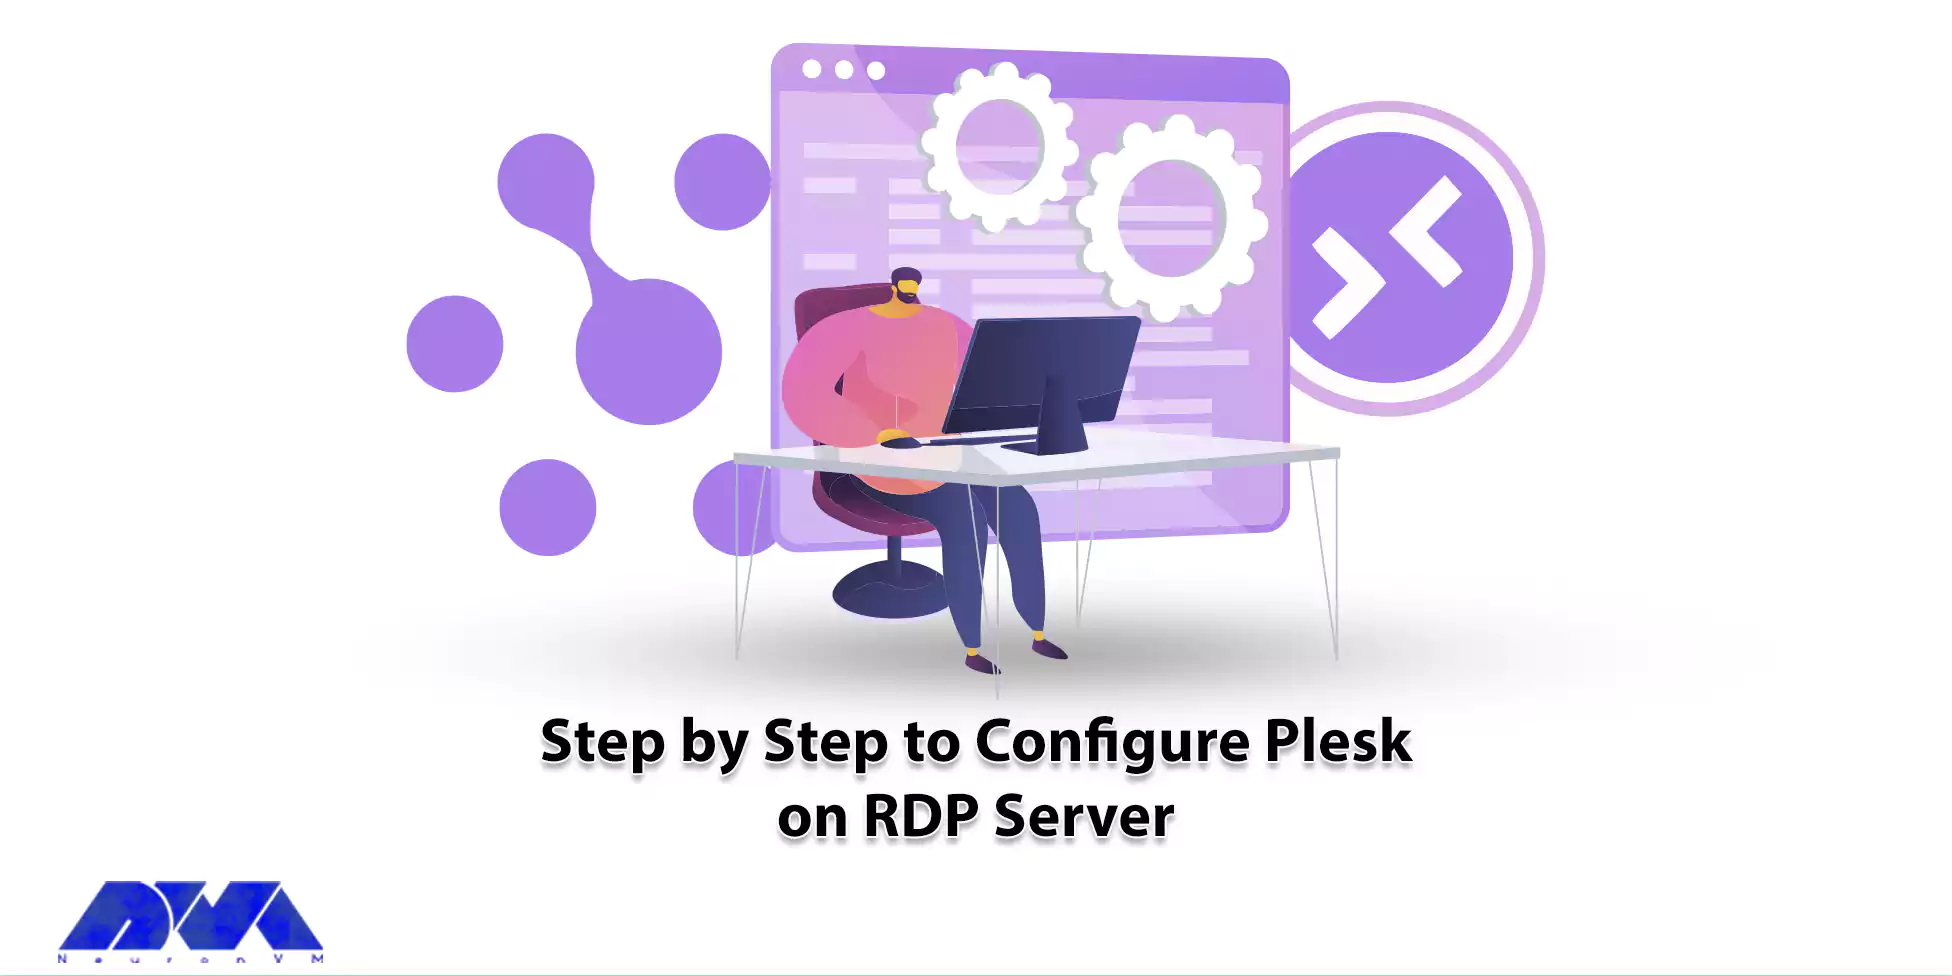 Step by Step to Configure Plesk on RDP Server